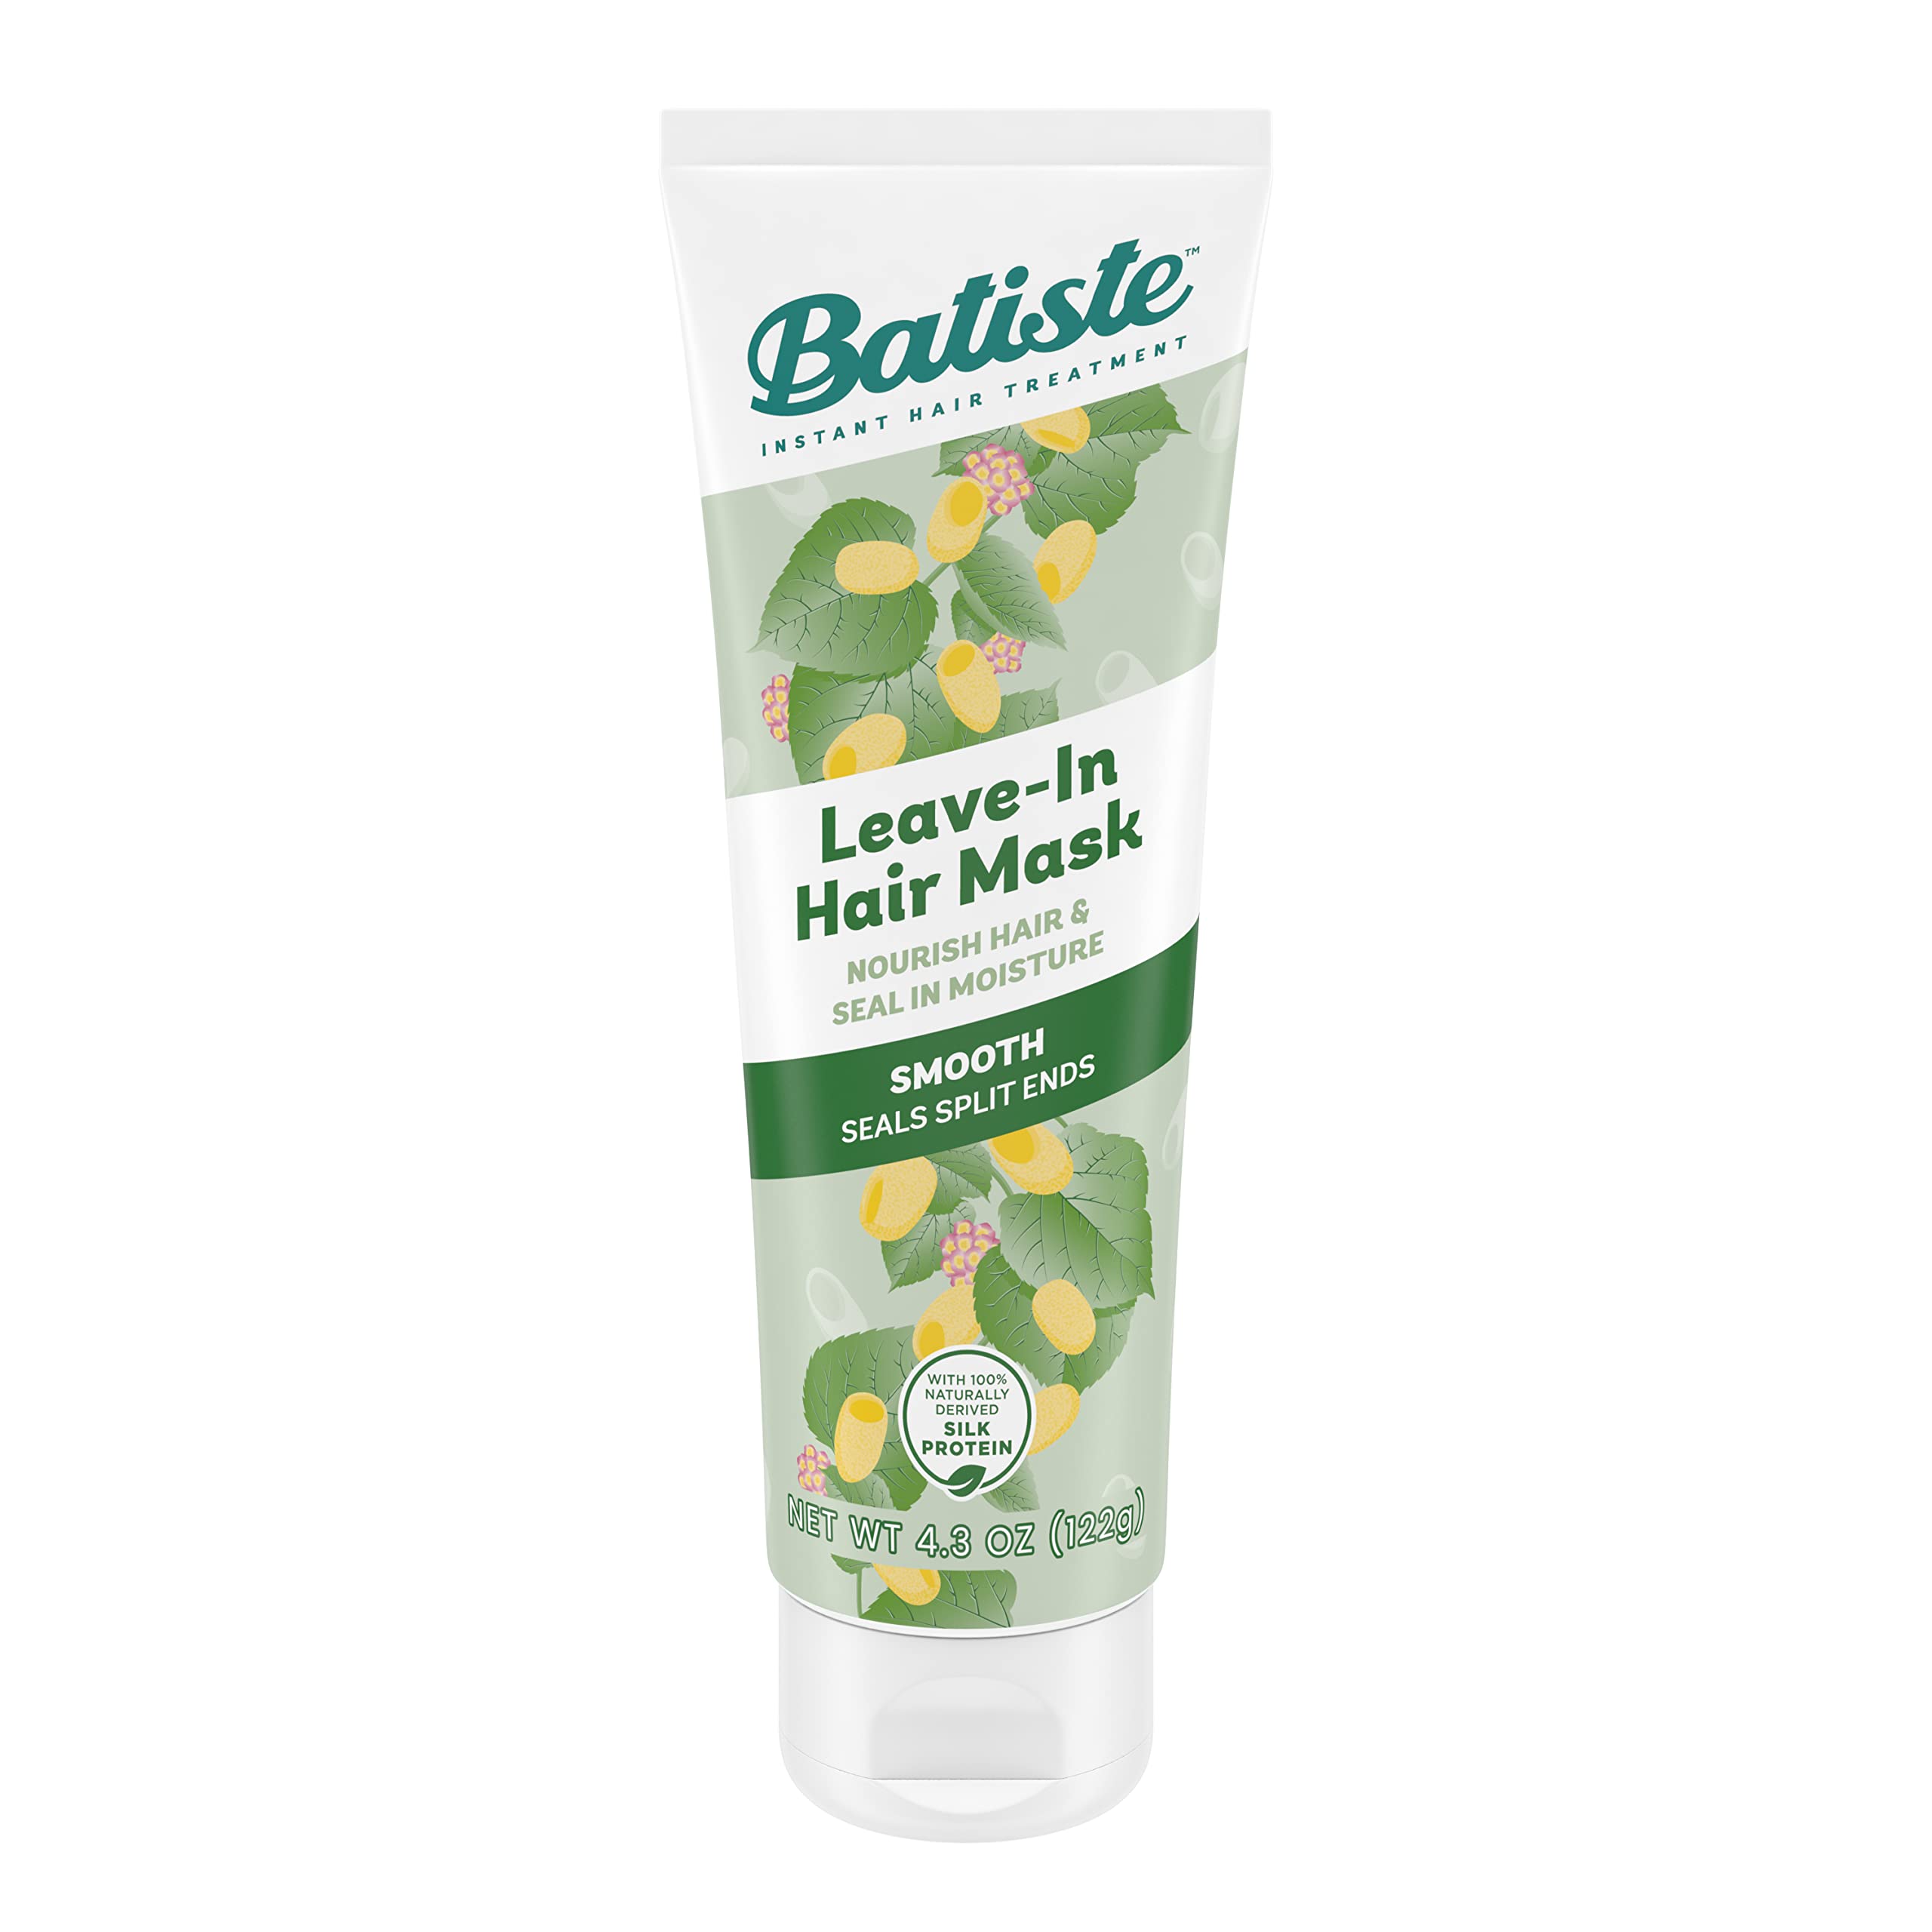 Batiste Heat Protectant For Hair & Leave In Conditioner Hair Mask, Repair and Restore Formula, Hair Conditioner for Dry or Wet Hair, Infused with vitamin E for Enhancing Haircare, 4.3oz.